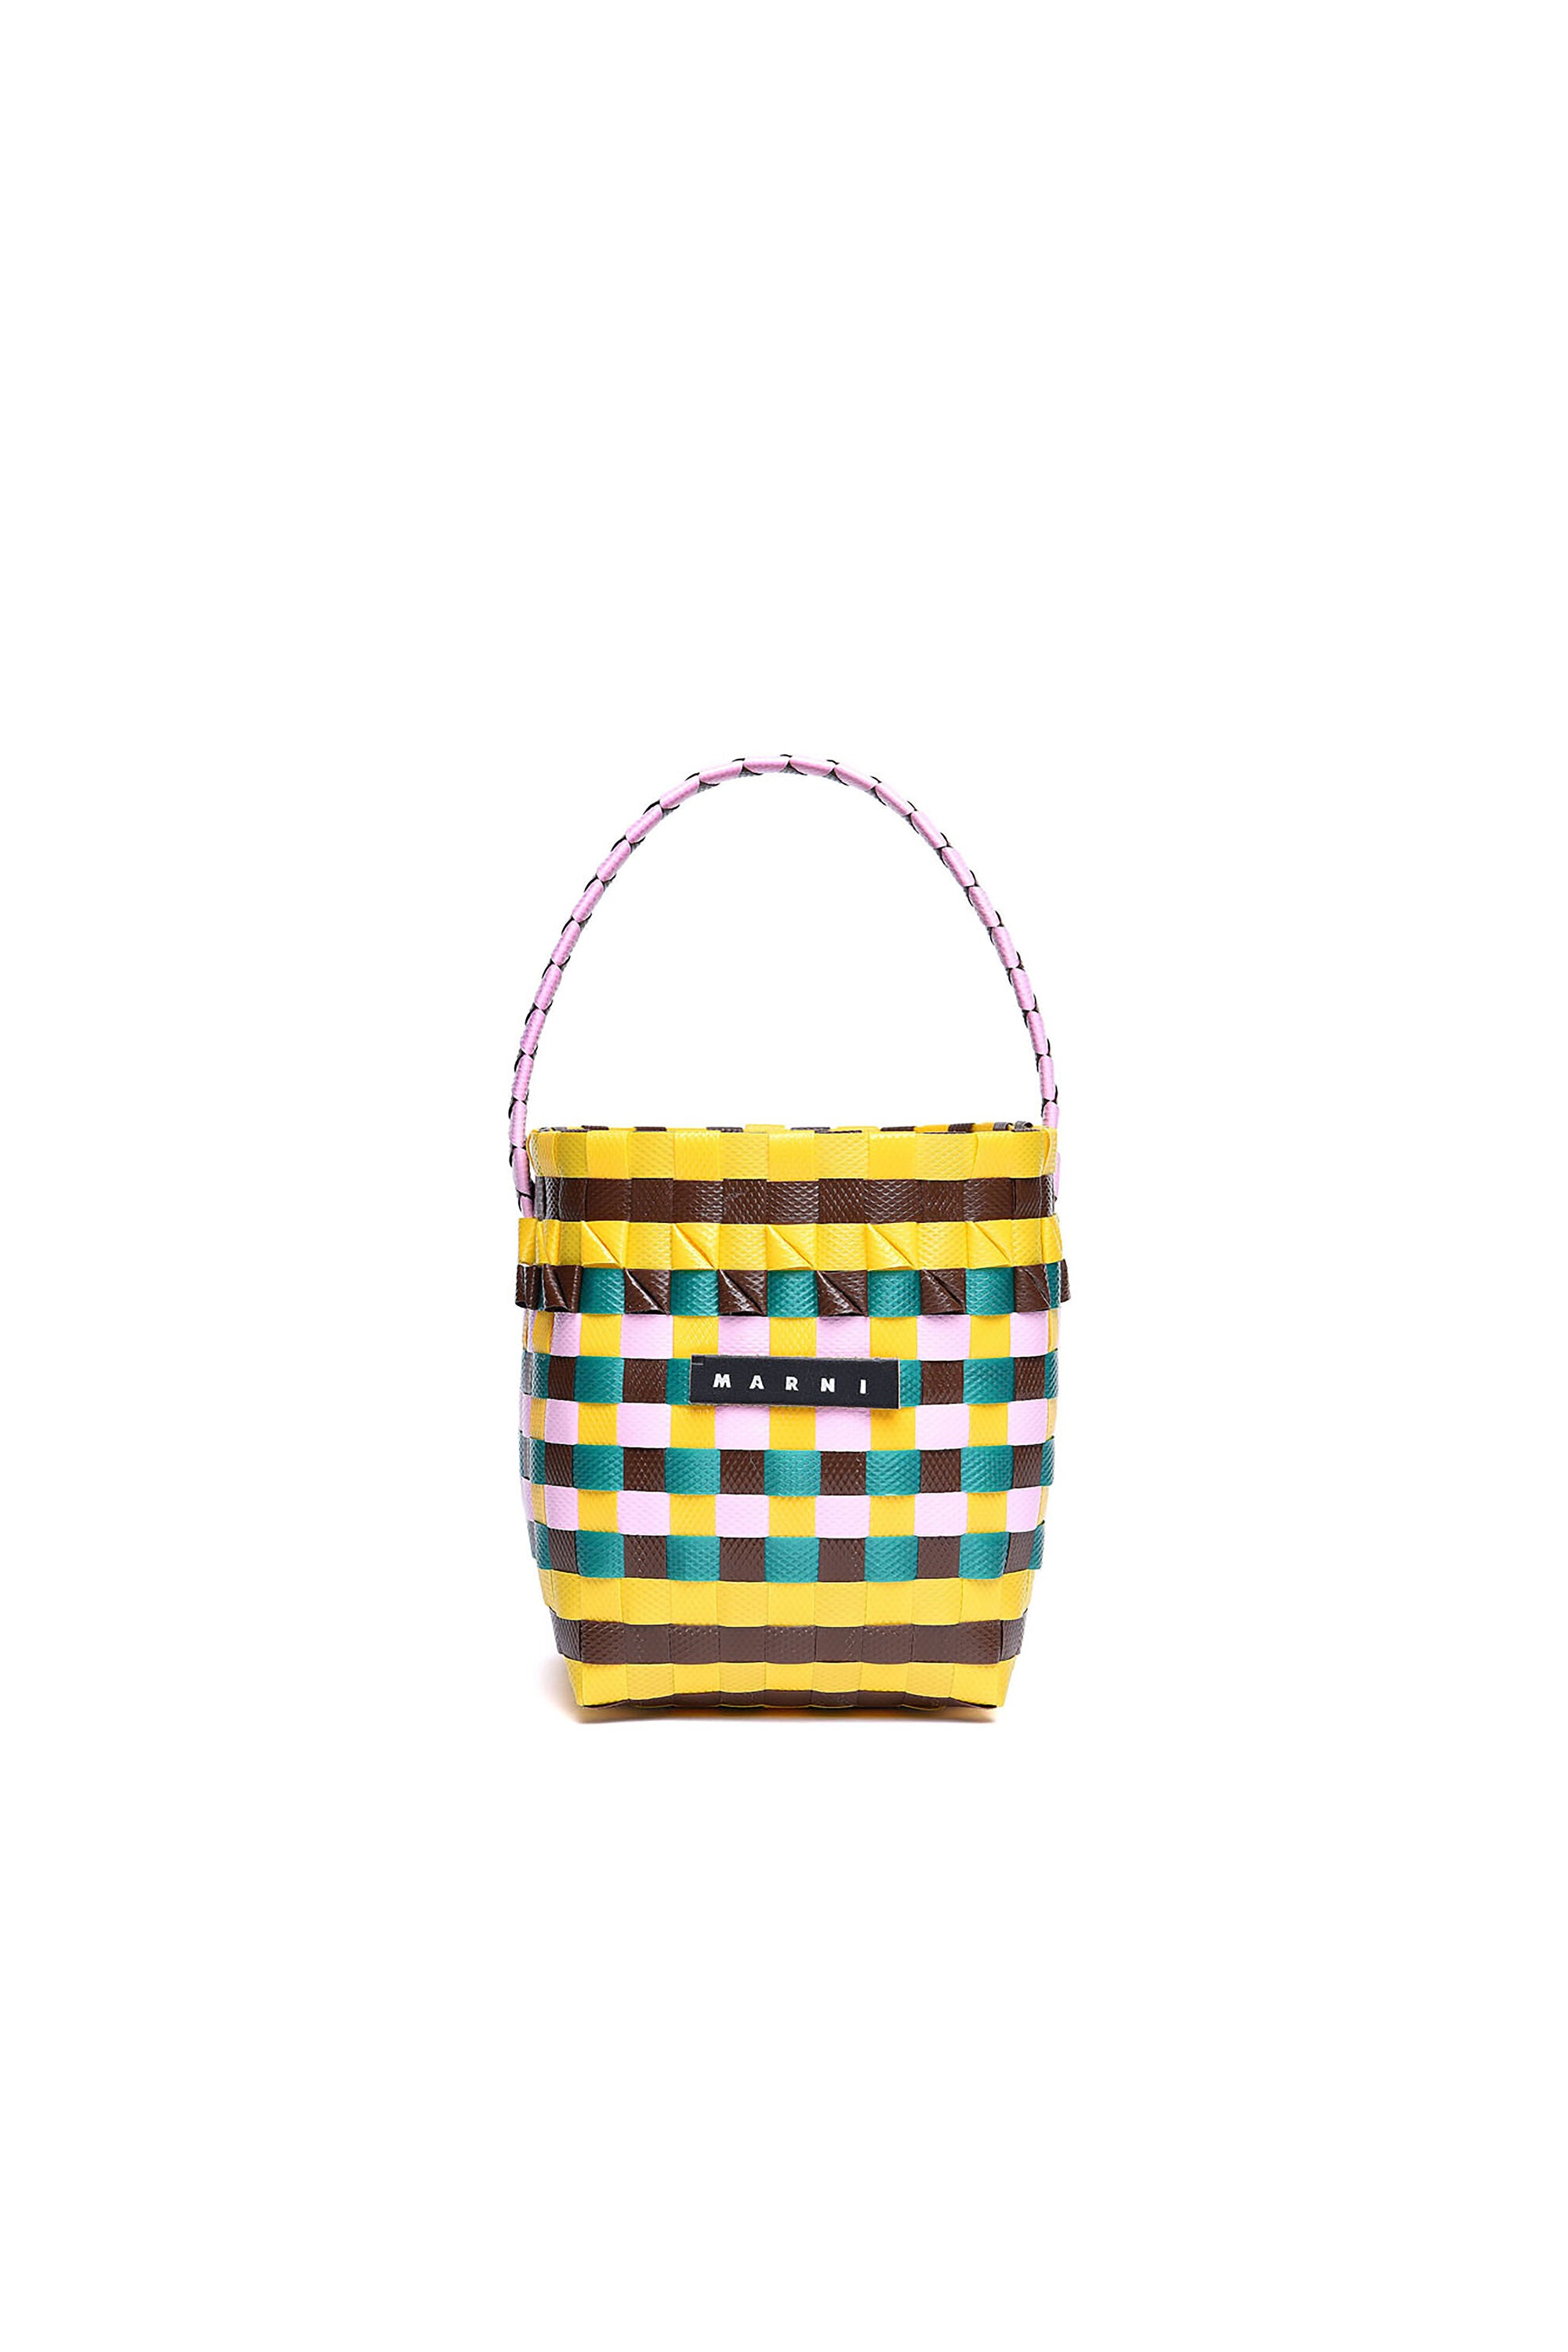 MARNI MARKET POD BASKET bag in red and pink woven material